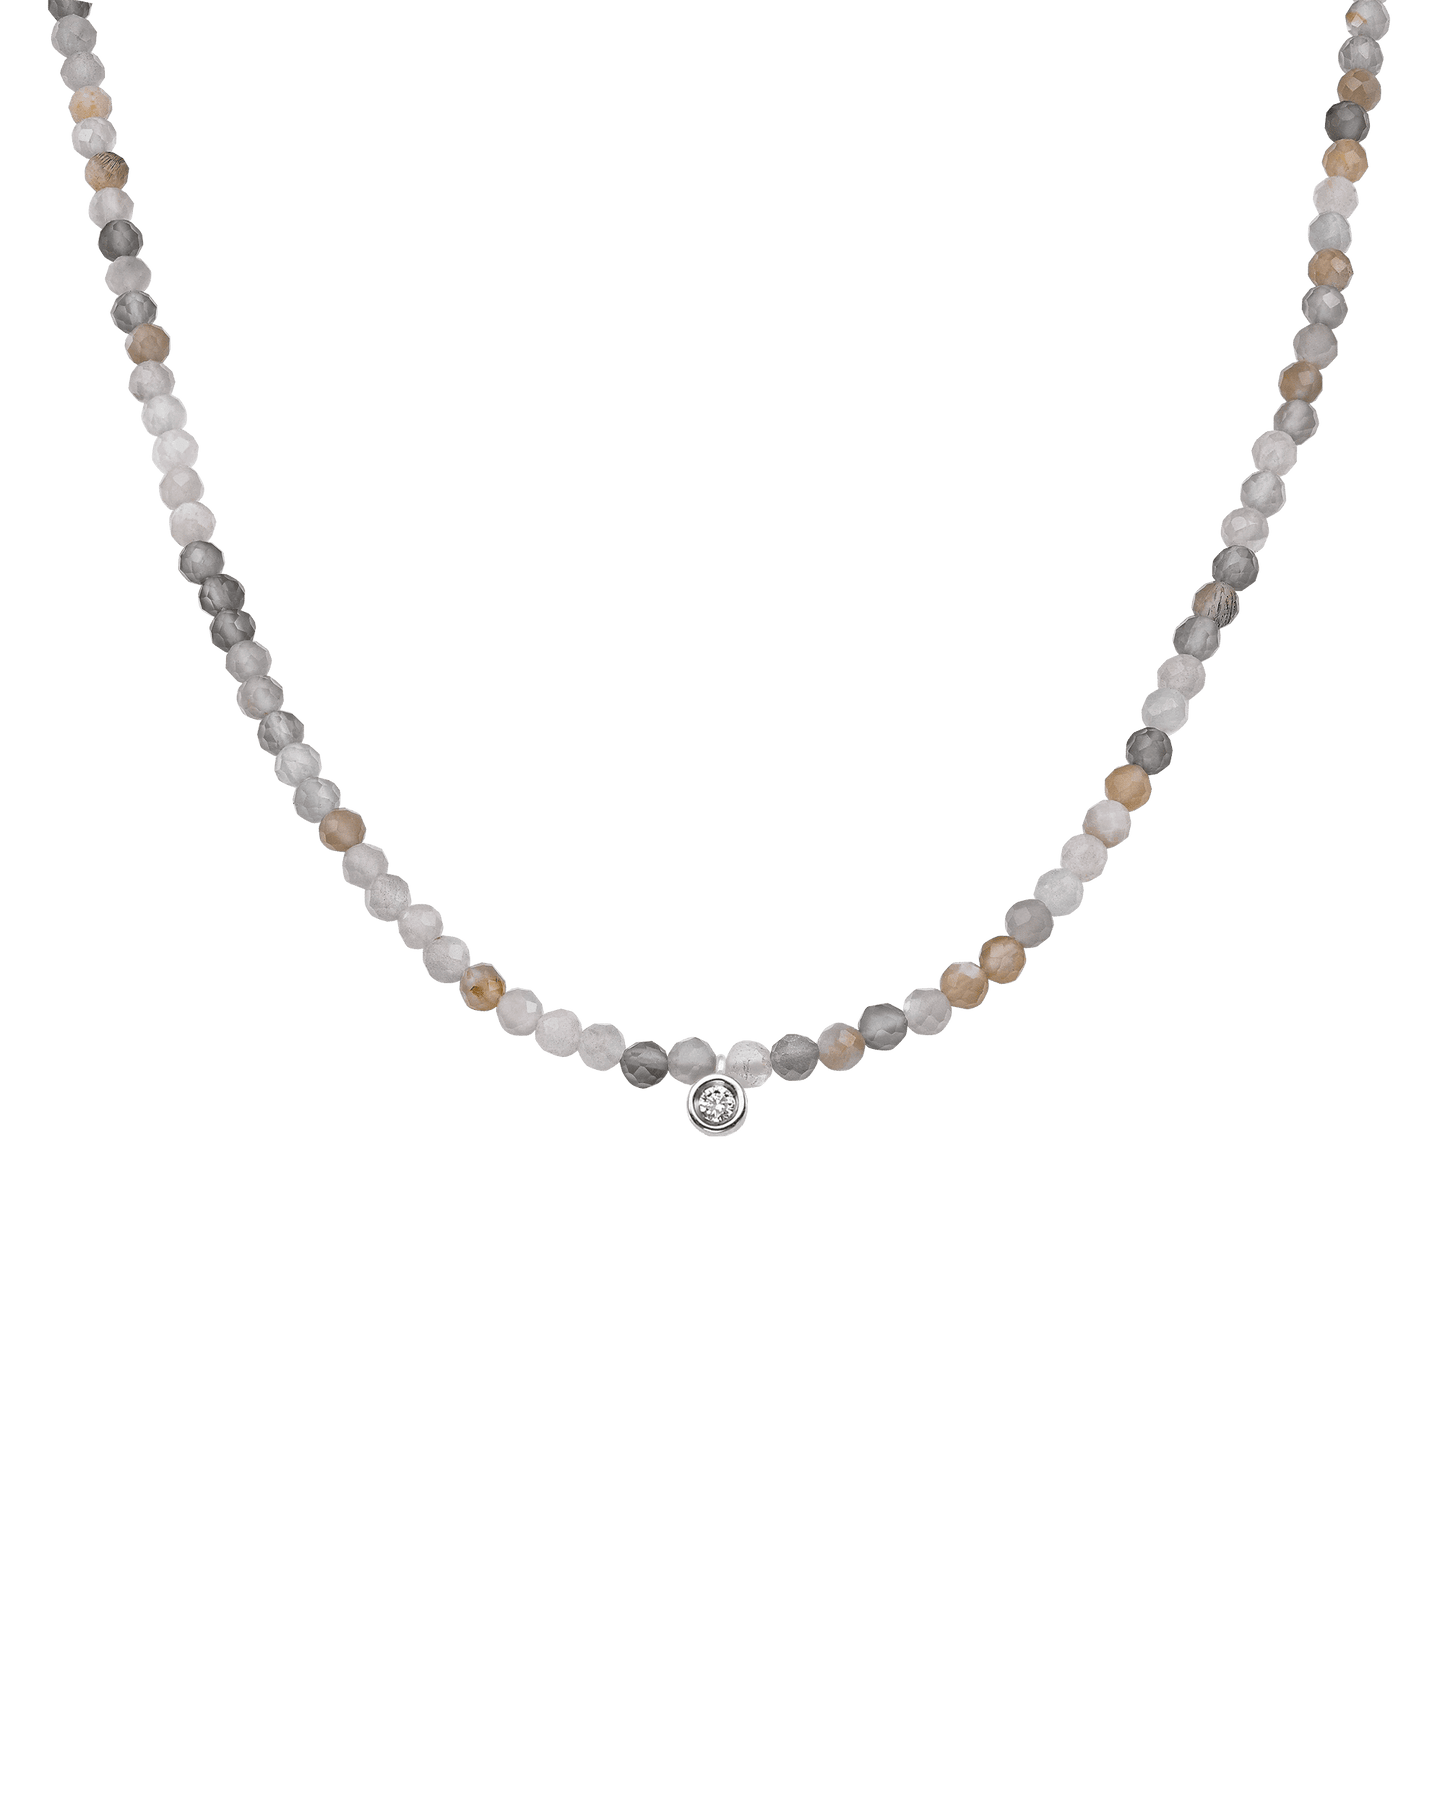 The Gemstone & Diamond Necklace - 14K White Gold Necklaces 14K Solid Gold Natural Moonstone Small: 0.03ct 14"